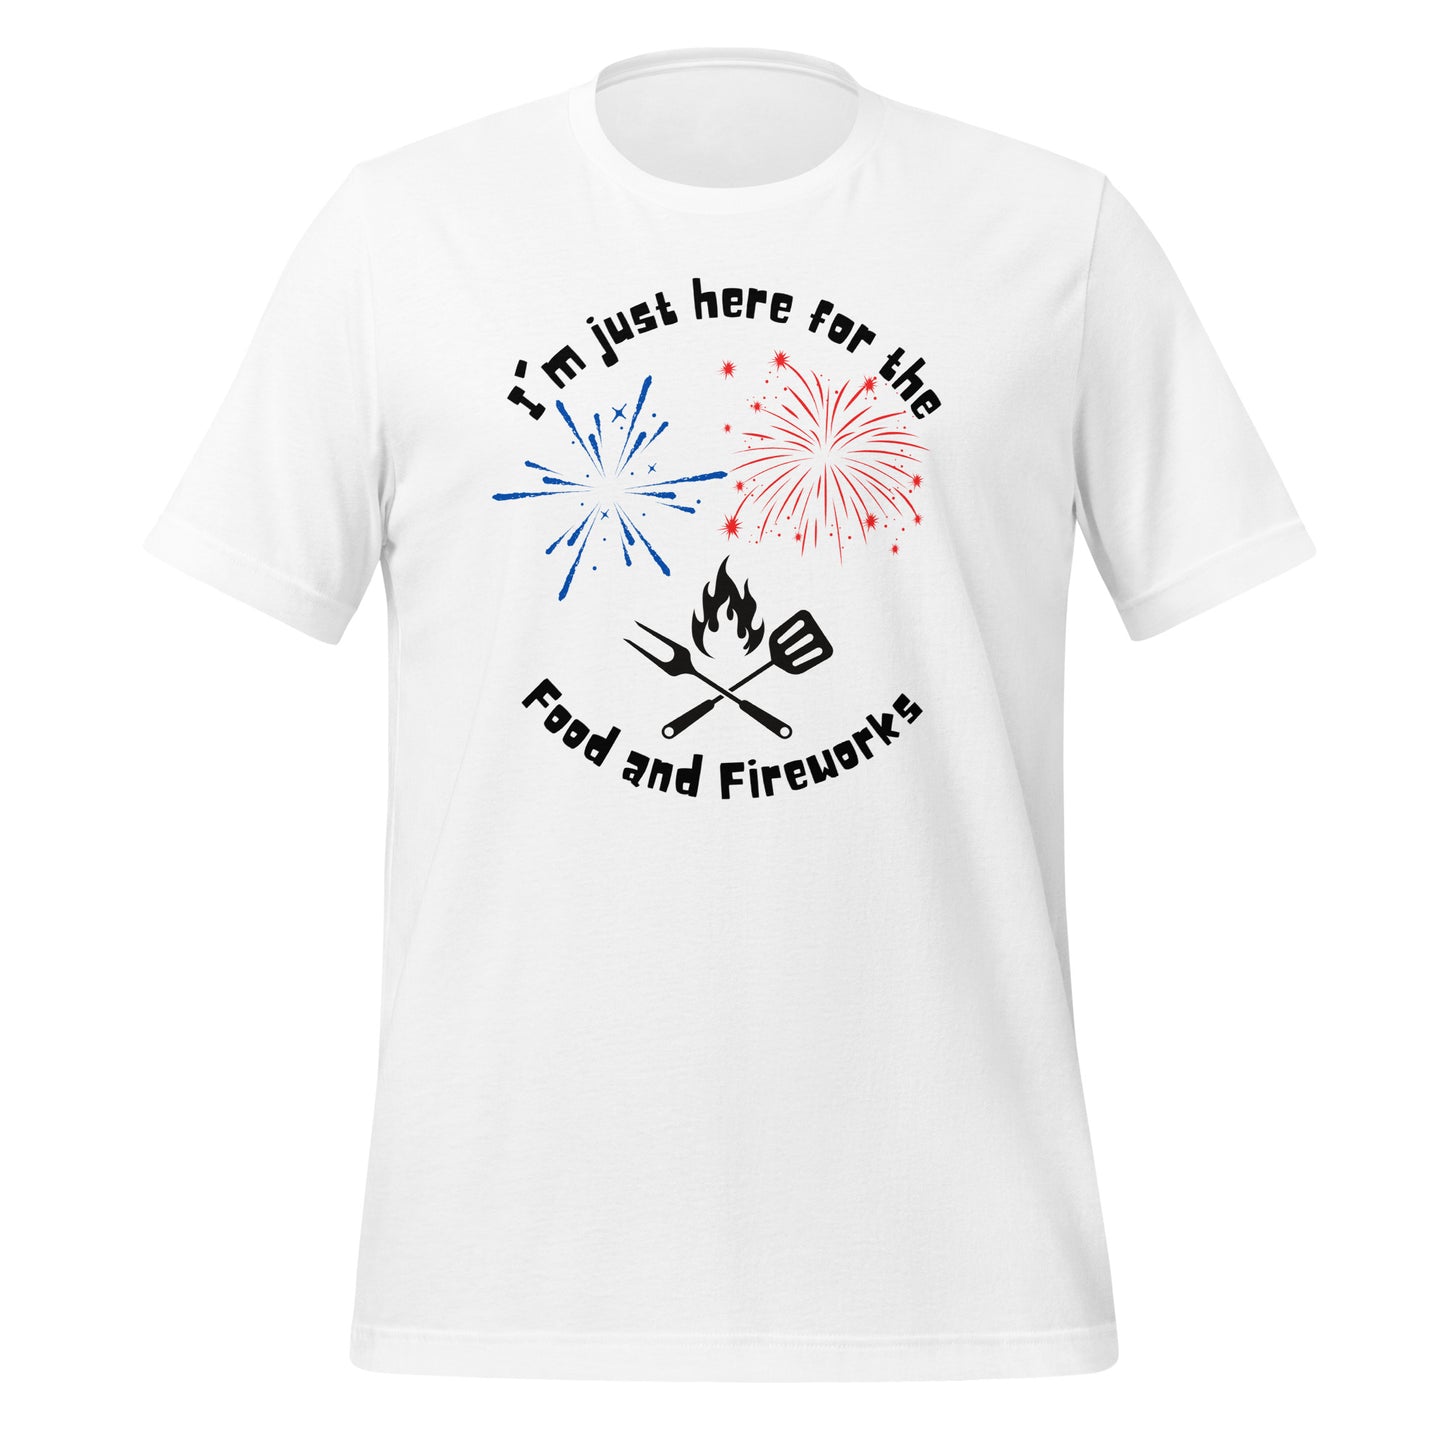 Food and Fireworks T-shirt